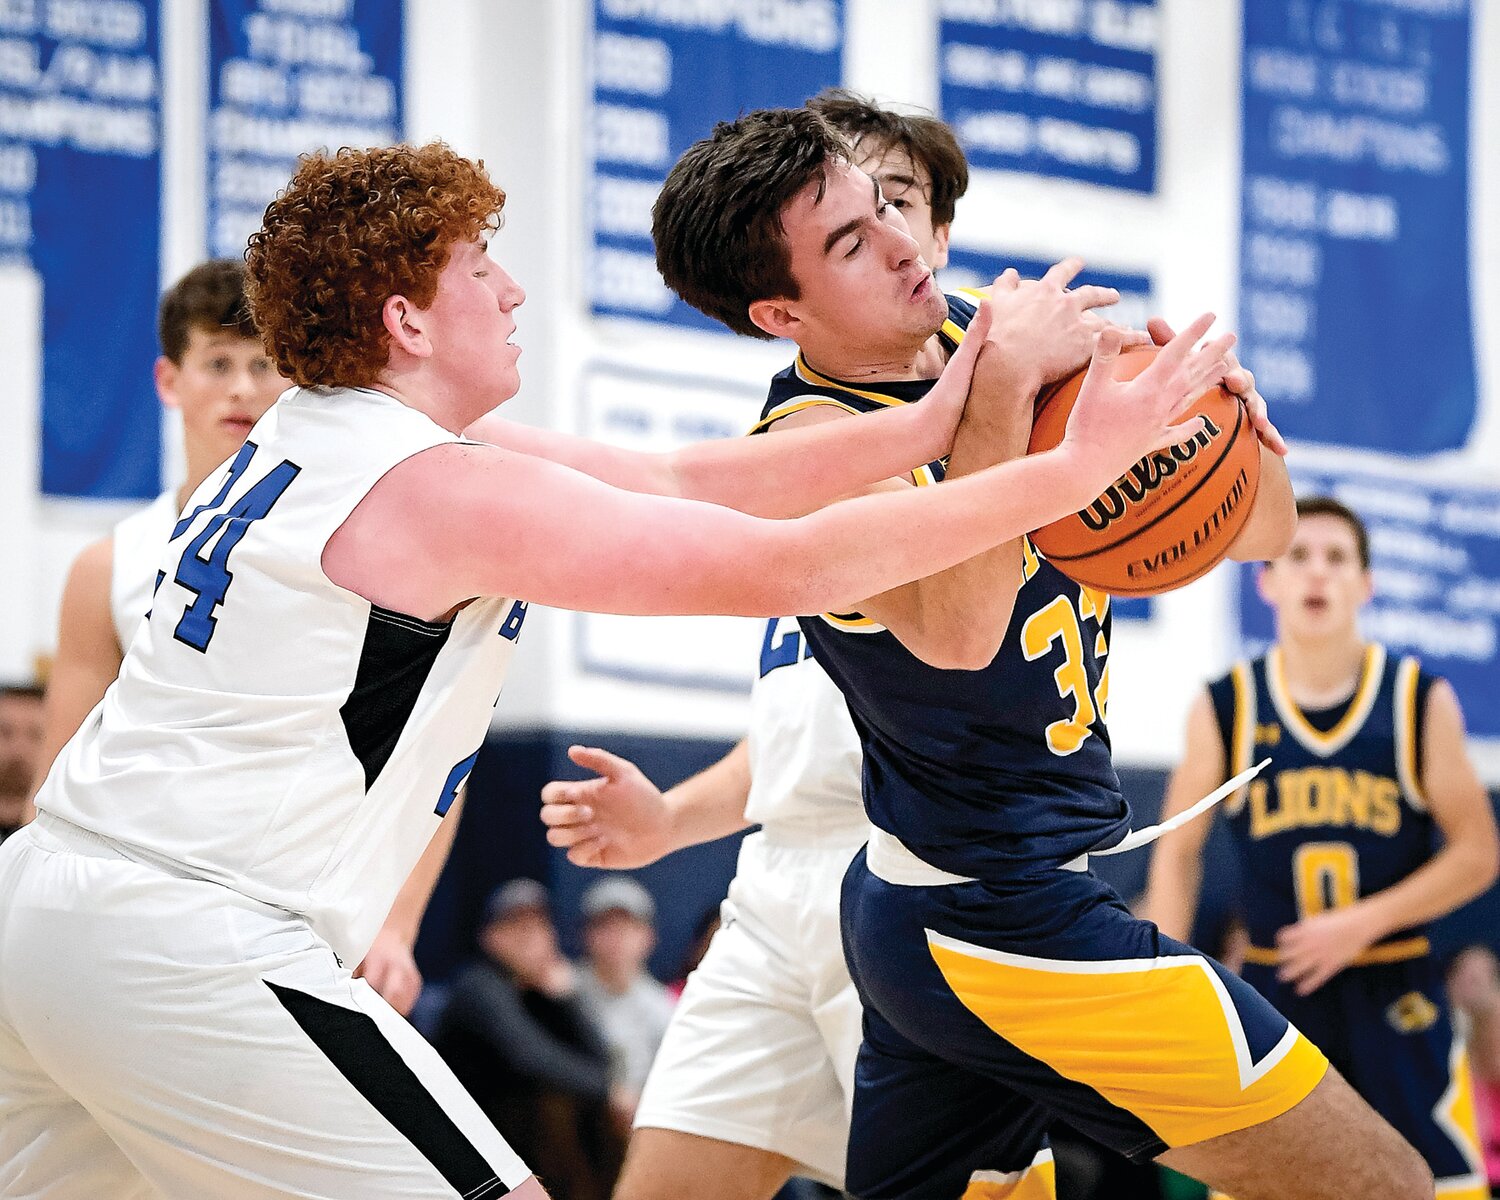 Jack M. Barrack Hebrew Academy’s Jonah Thomas and New Hope-Solebury’s Dylan Fitzgerald scrap for a rebound during the first half.